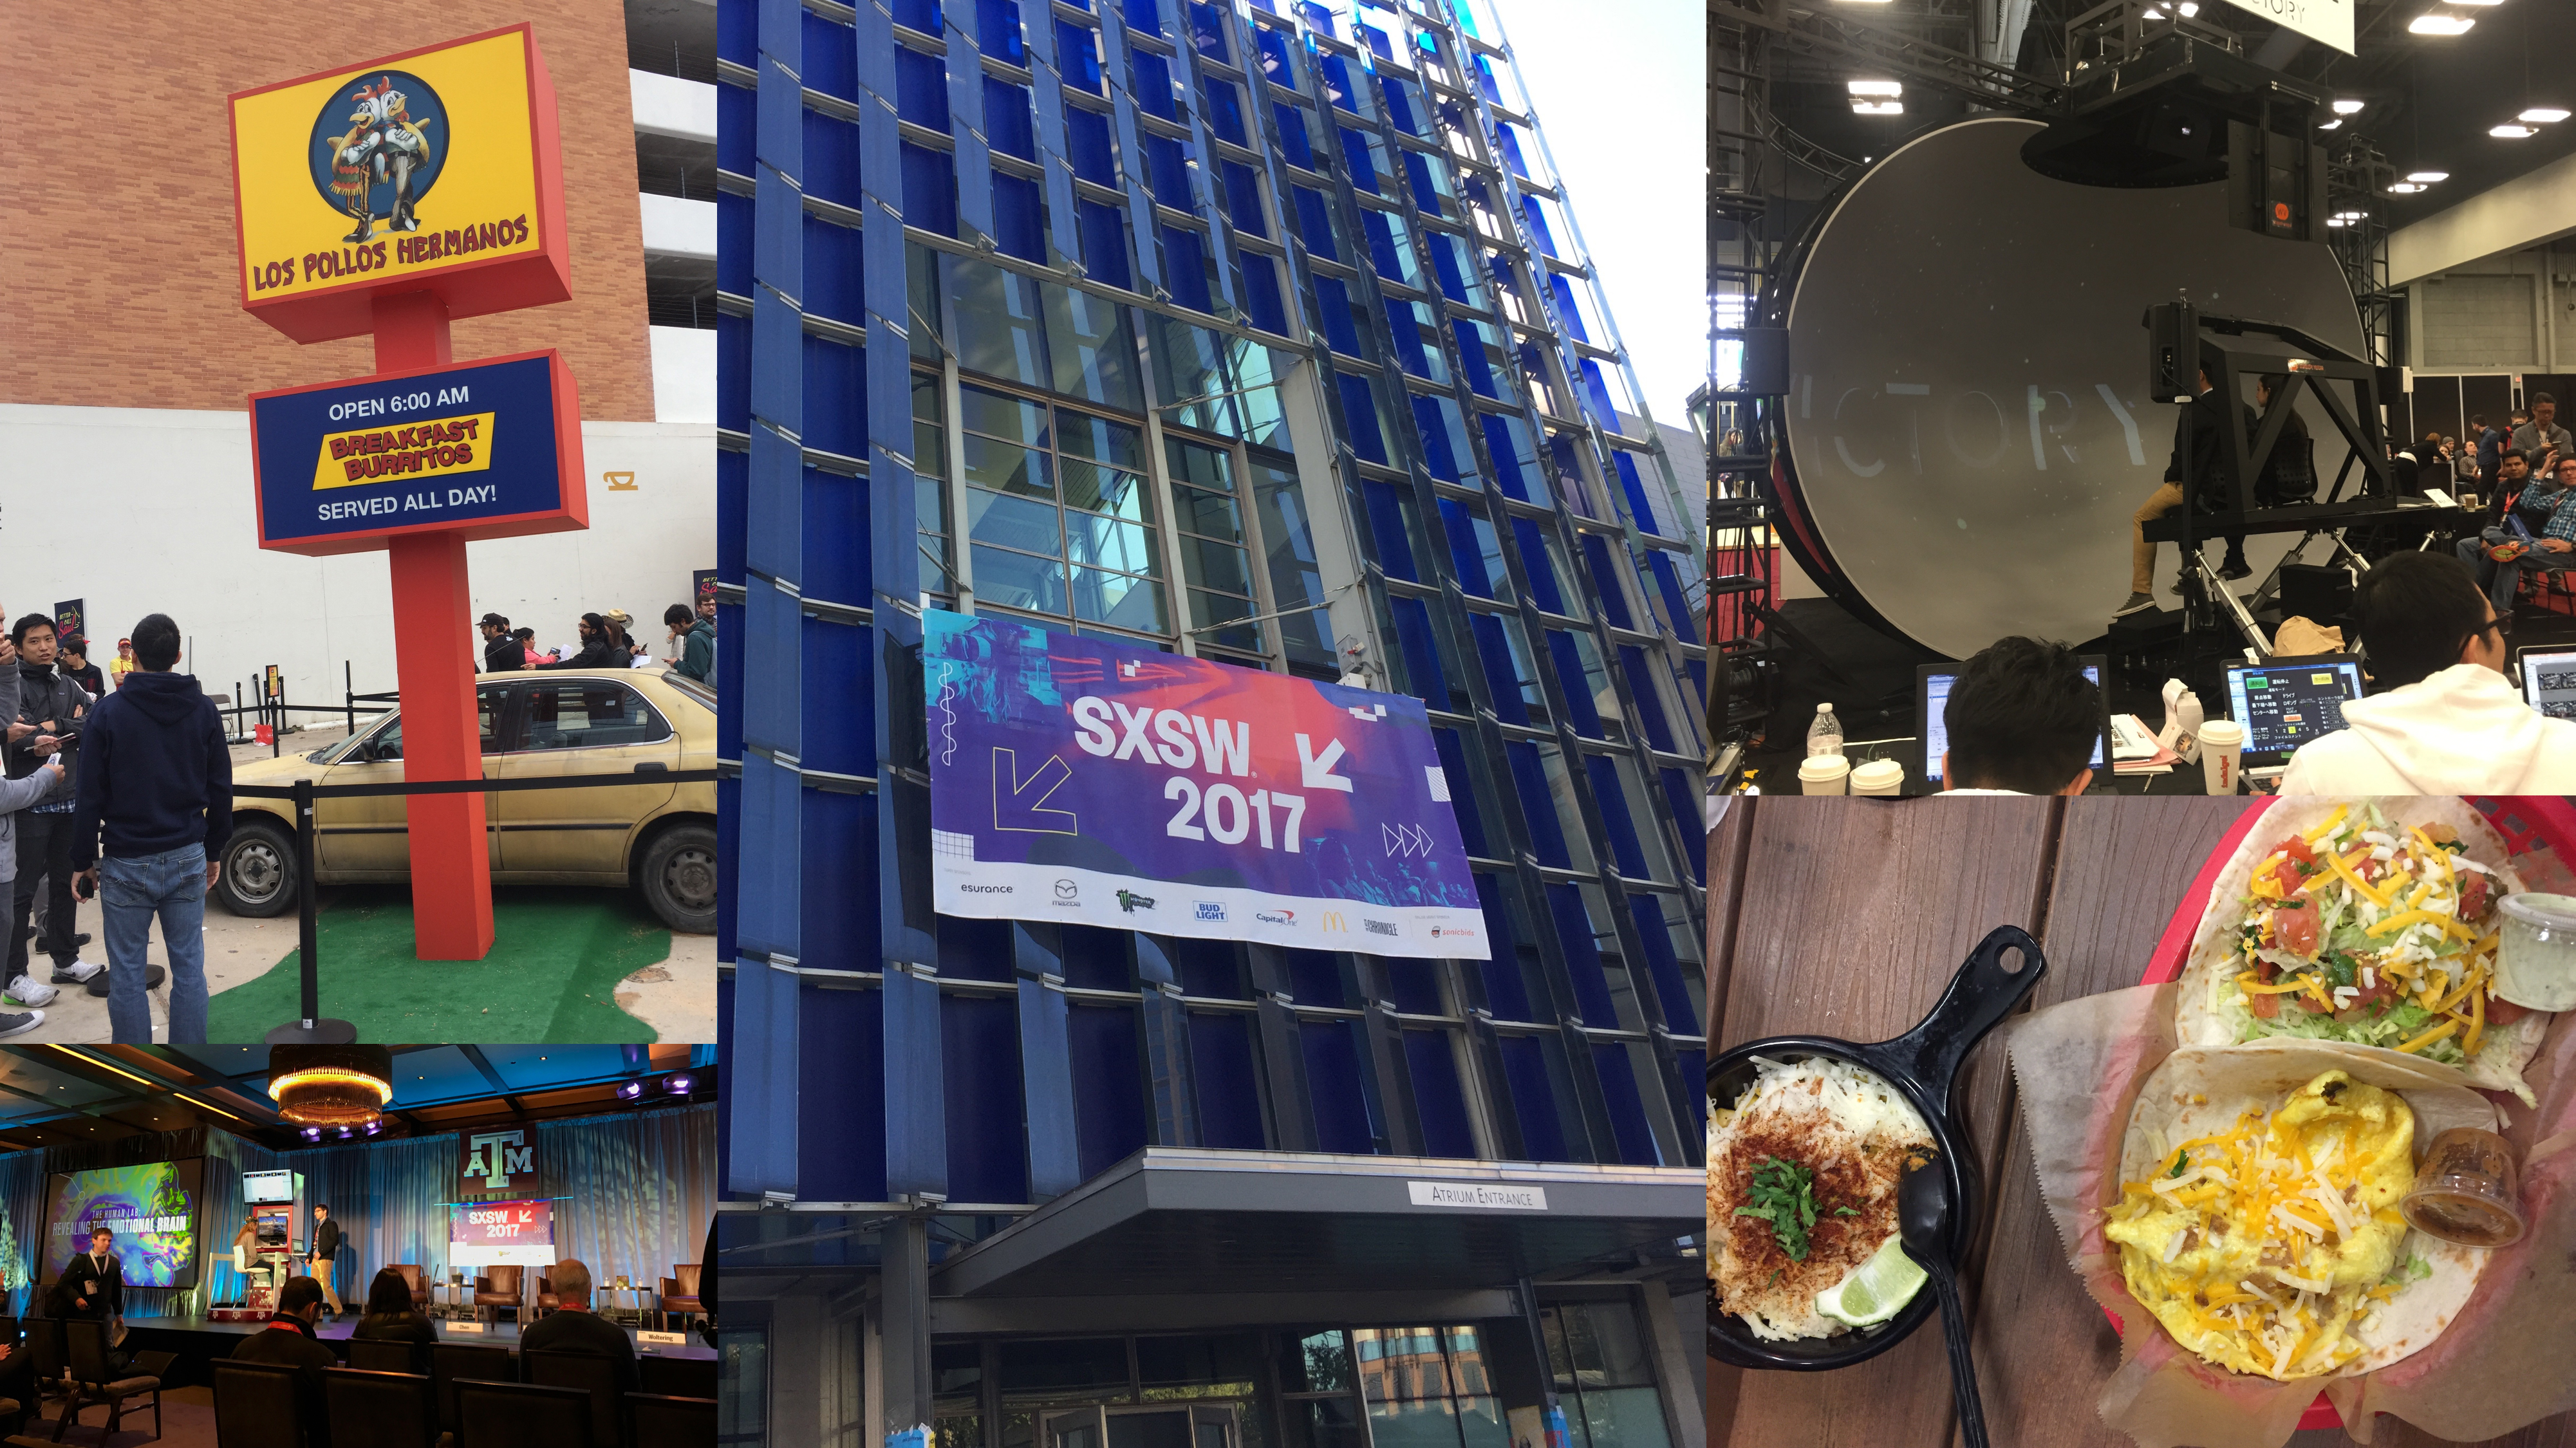 Rodgers Townsend Account Director recaps the highlights from SXSW 2017